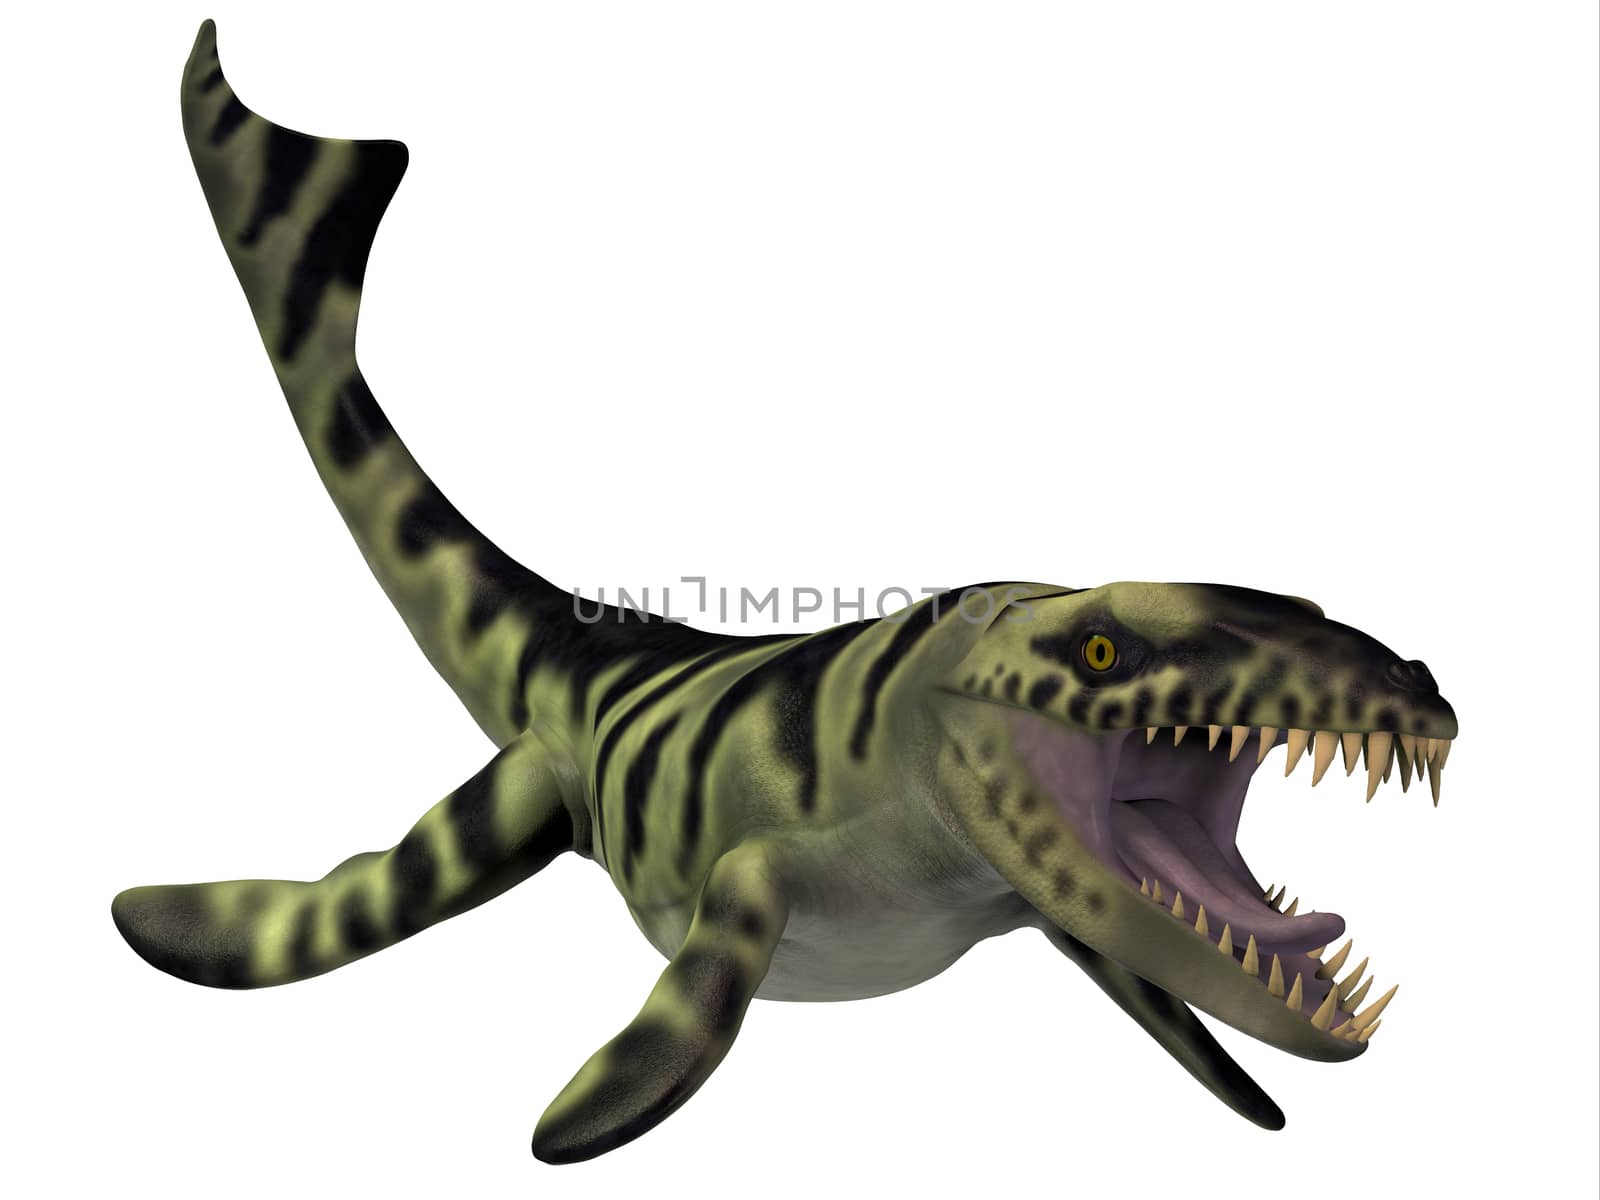 Dakosaurus marine reptile lived from the Jurassic into the Cretaceous Era and was a carnivore.